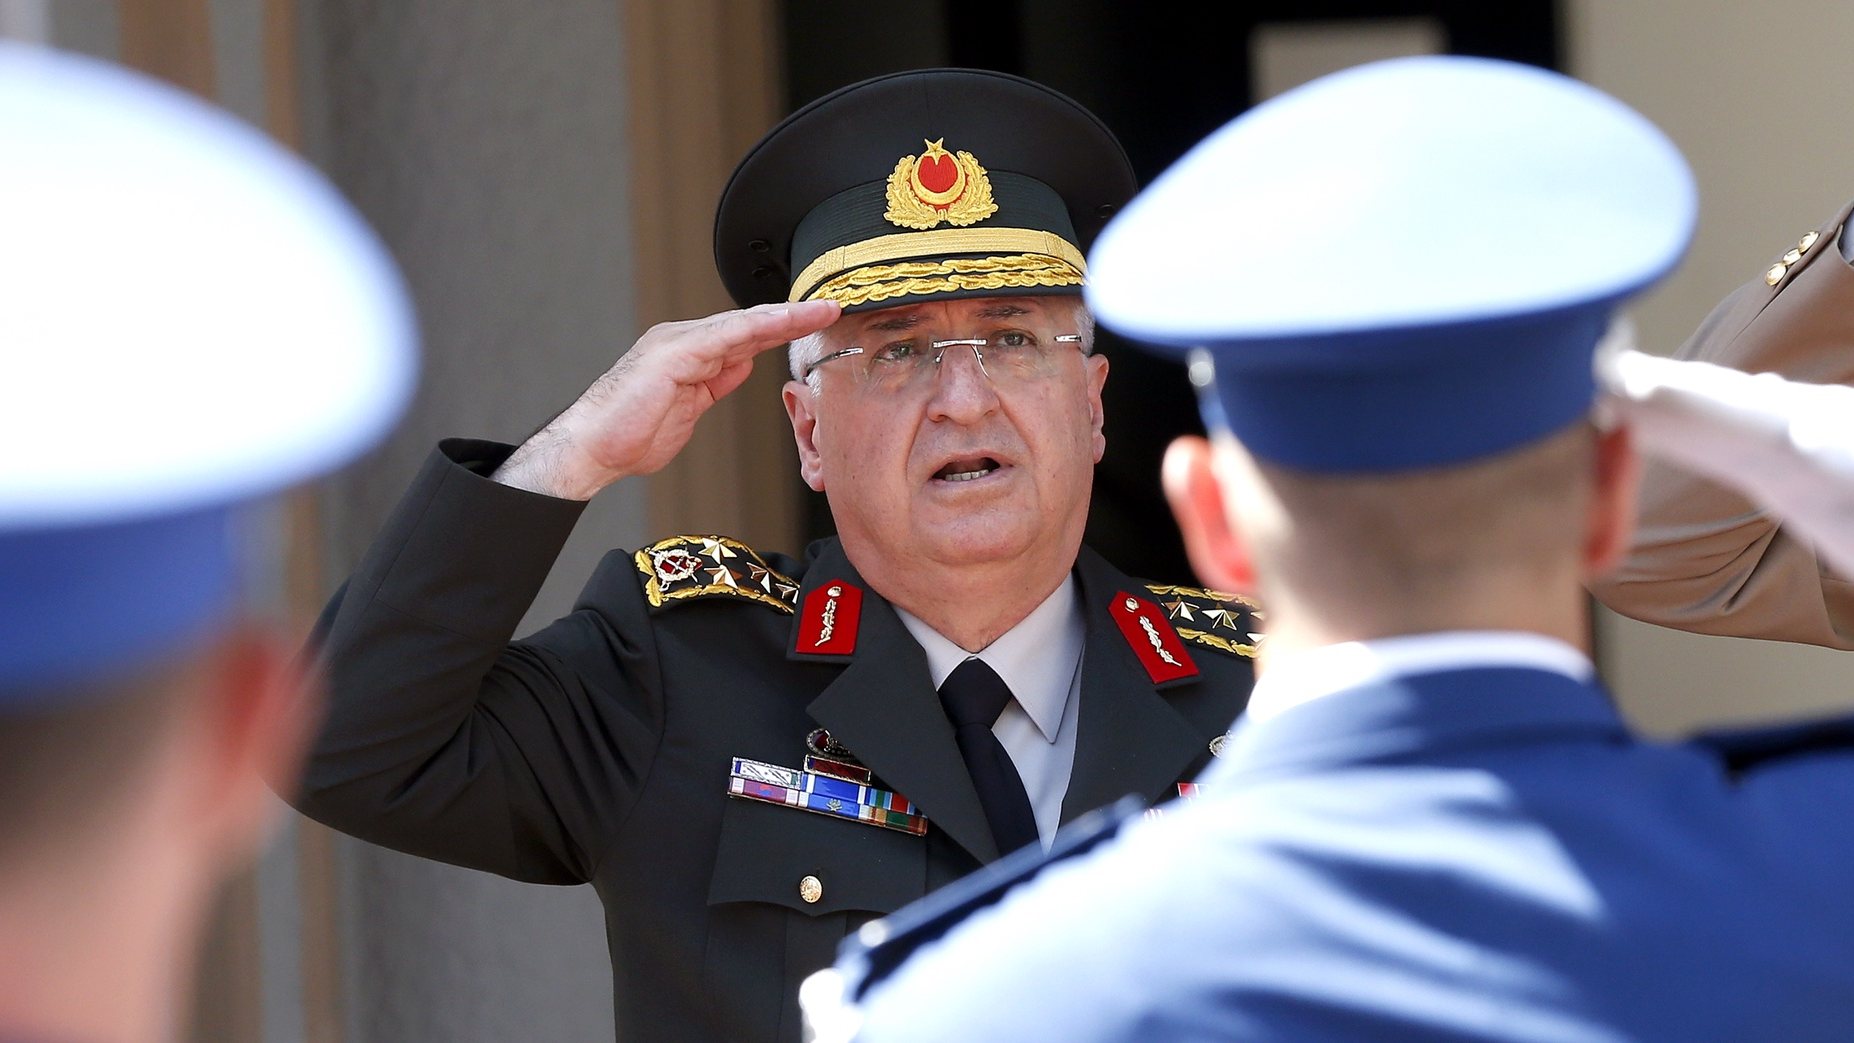 epa07647472 Chief of Staff of the Turkish Armed Forces General Yasar Guler, review the honor guard during a welcoming ceremony in Sarajevo, Bosnia and Herzegovina, 14 June 2019. General Guler is on a visit to Sarajevo.  EPA/FEHIM DEMIR